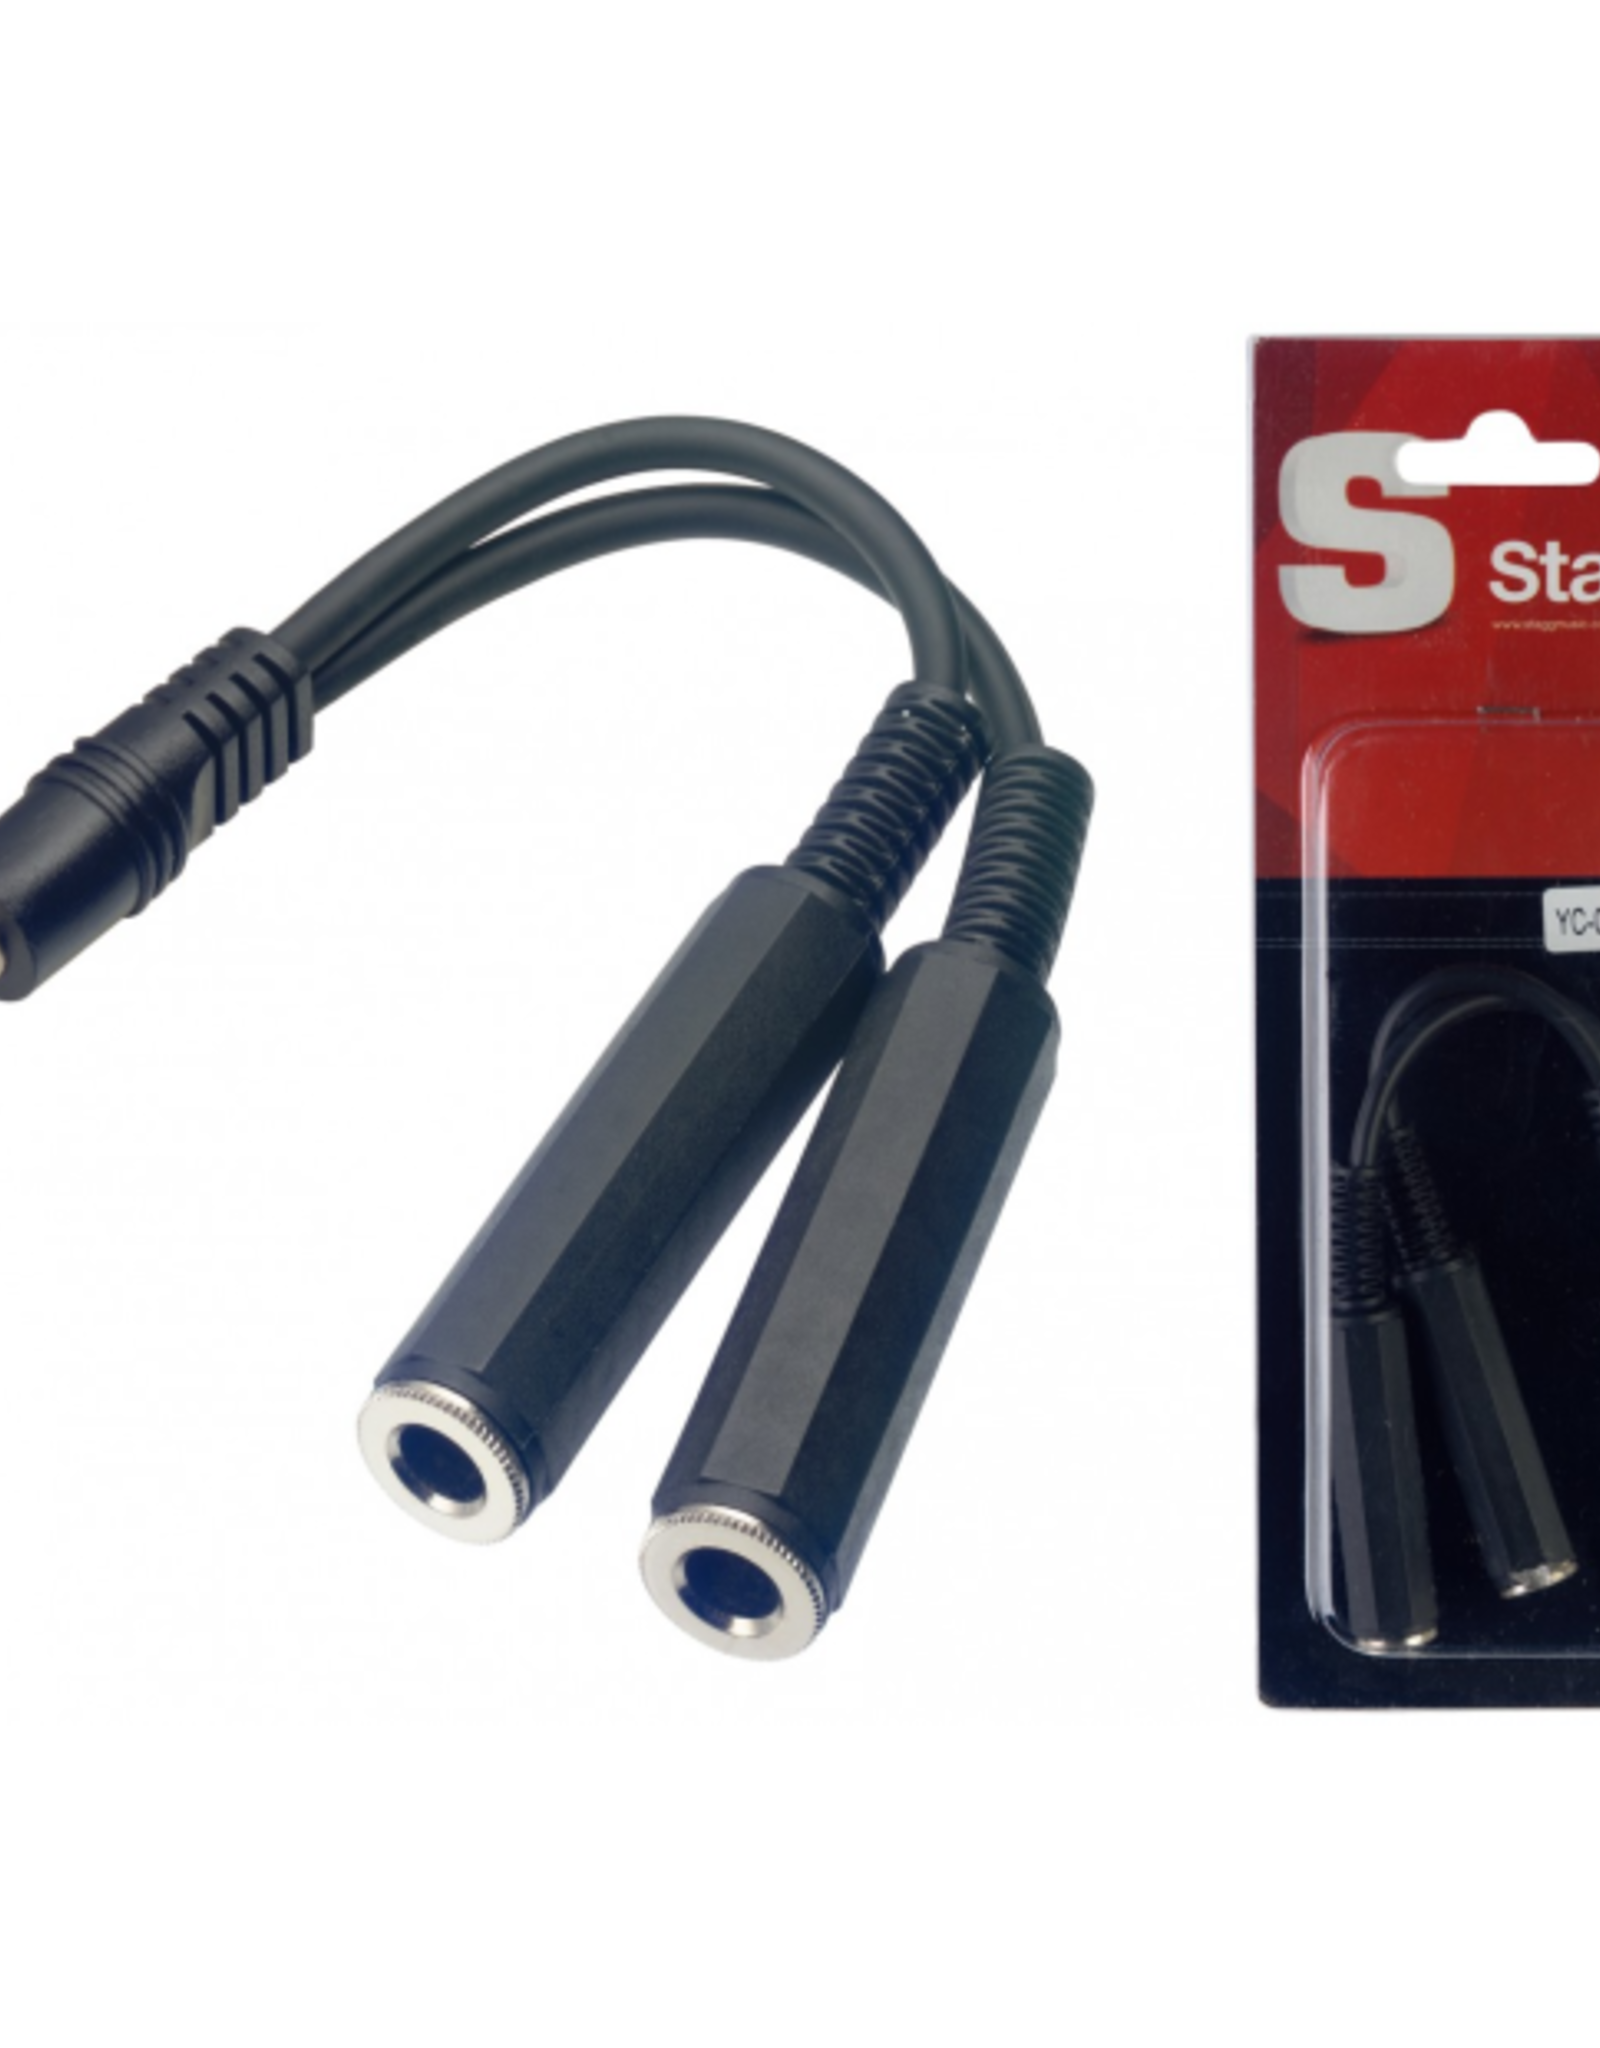 Stagg Stagg  Male Stereo Mini Phone Plug/2 x Female Stereo Jack Adaptor Cable